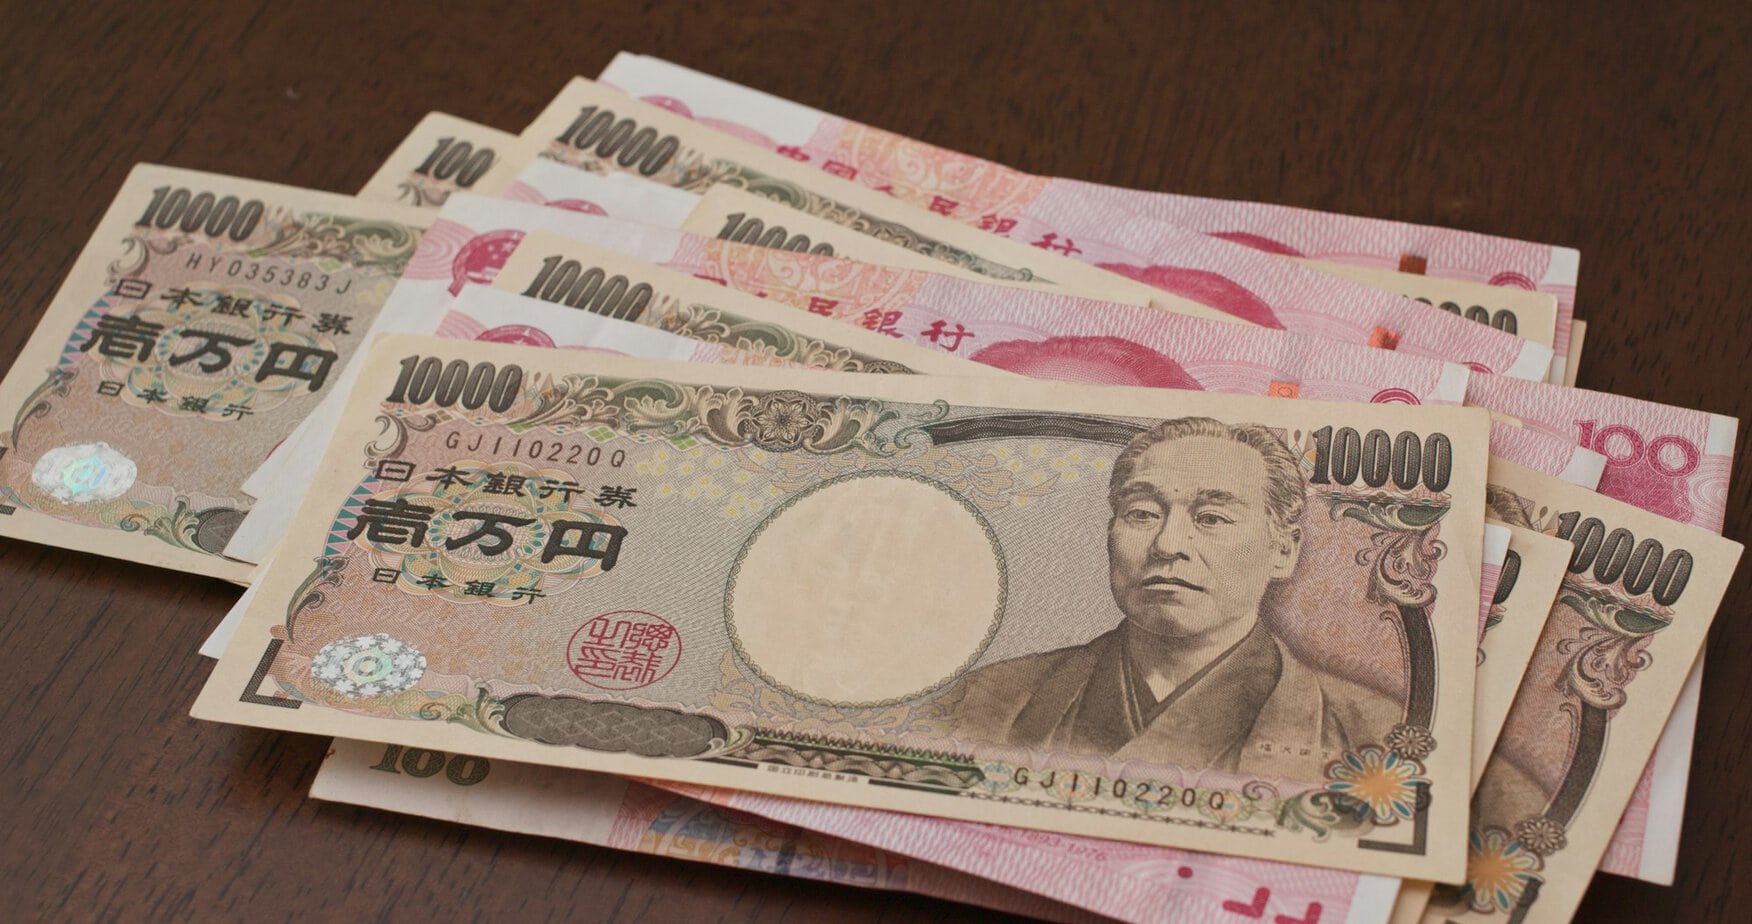 Chinese RMB banknote and Japanese Yen